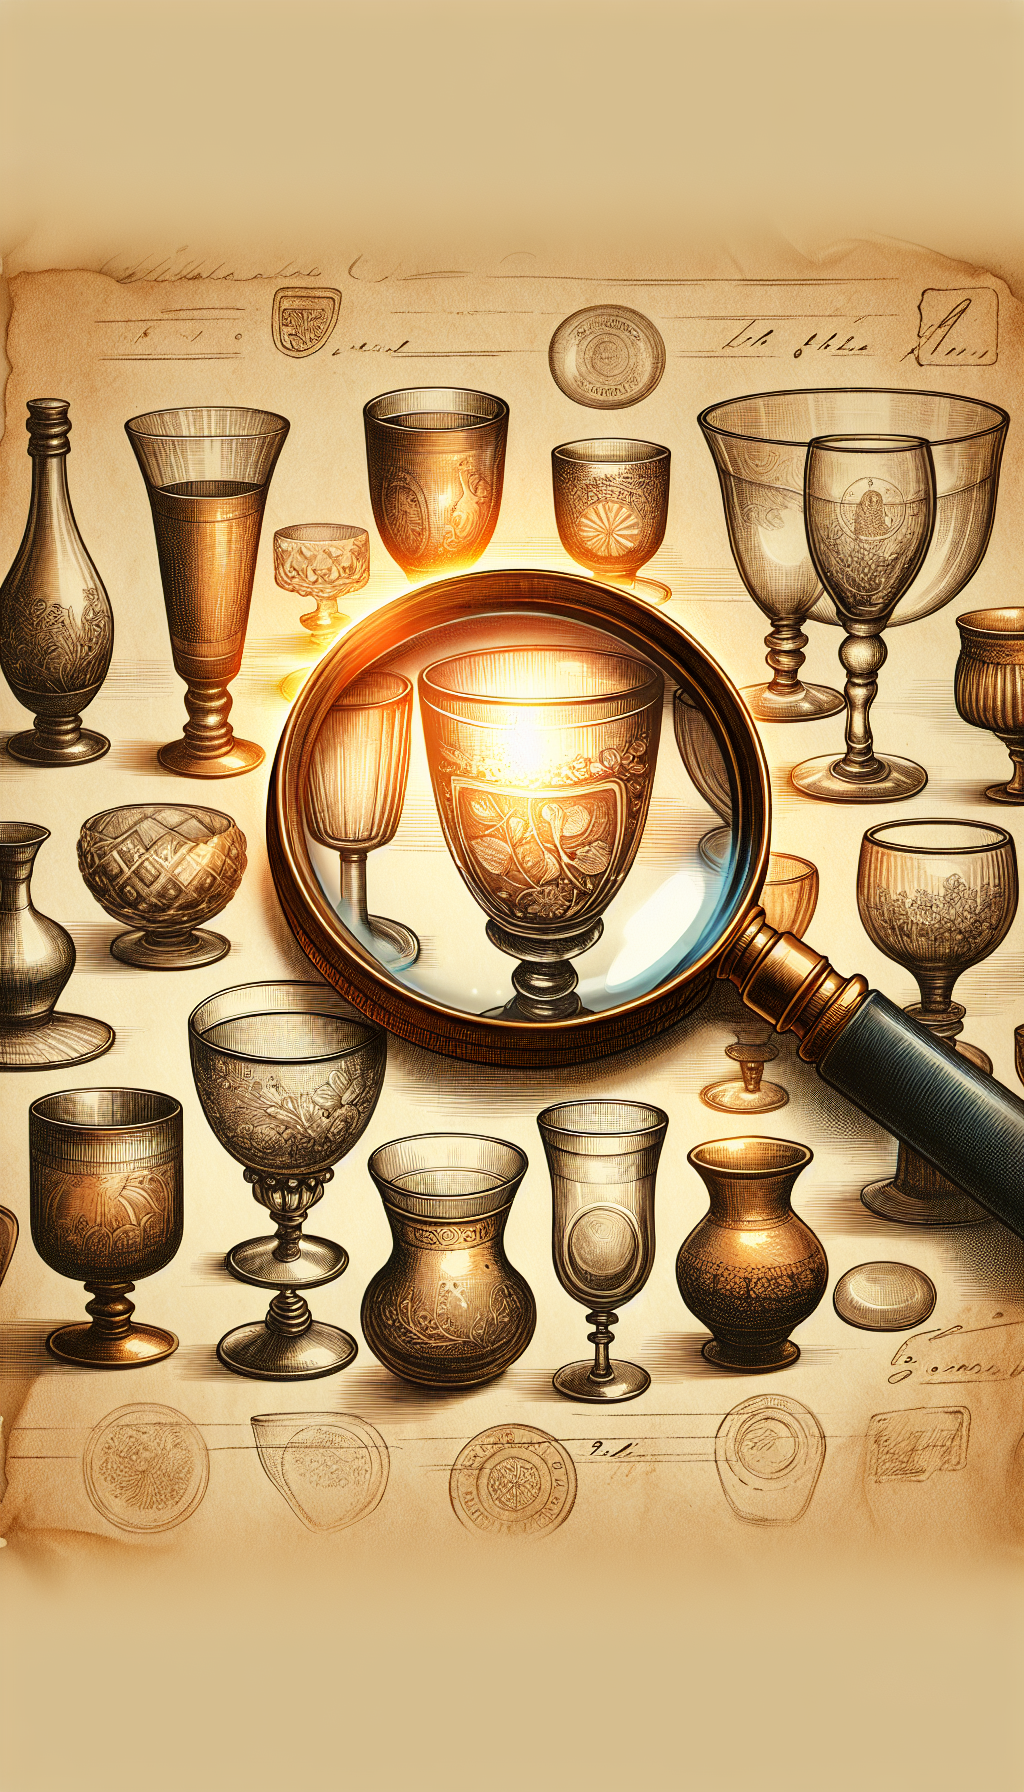 An illustration showcases a magnifying glass hovering over a curated collection of vintage glasses, each emanating a soft, golden glow emphasizing unique details like etchings, stamps, and maker's marks. The magnifying glass reflects ghostly images of their historical origins, subtly hinting at the era and craftsmanship clues essential for antique drinkware identification, all framed over an antique parchment background.